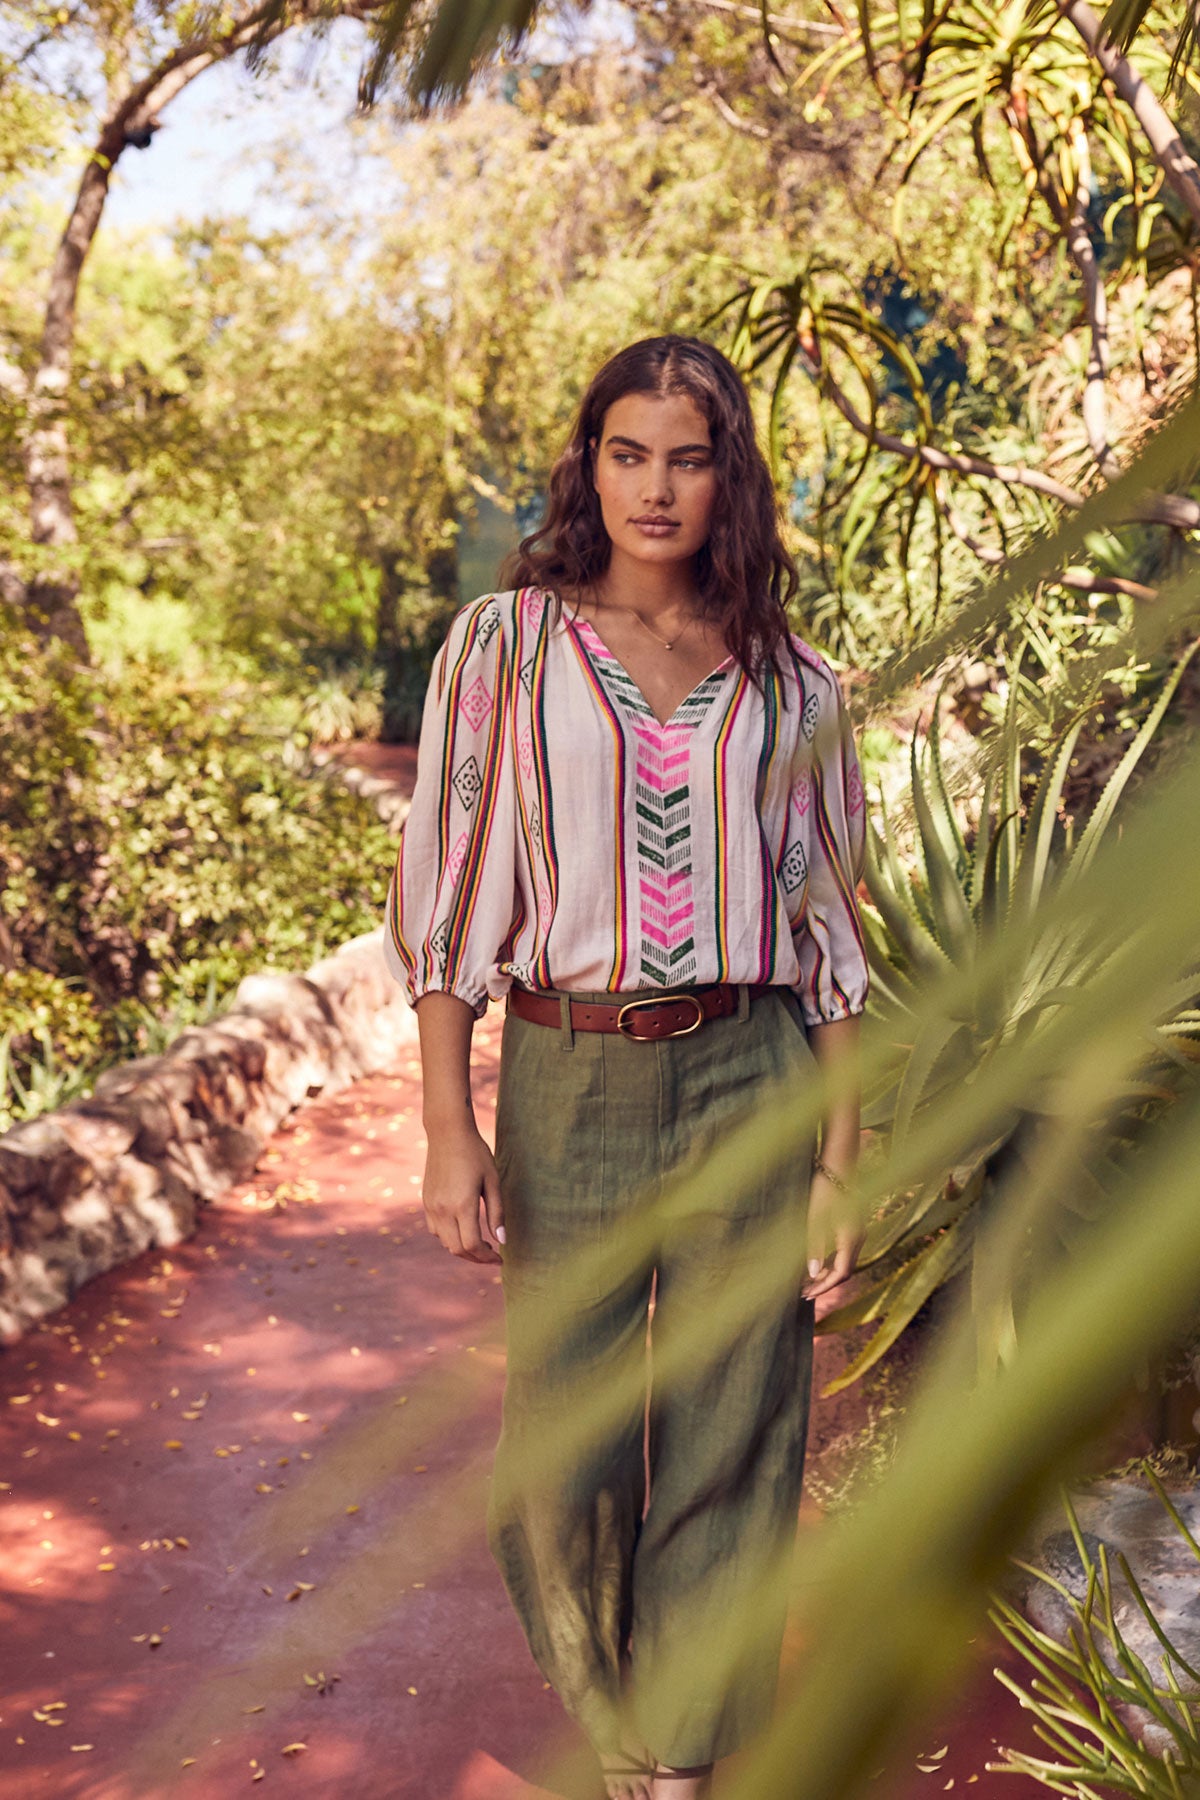 Woman walking down garden path wearing Beth Boho Top in multi colored jacquard print tucked into Dru pant in basil green with brown belt and necklace -26305271759041